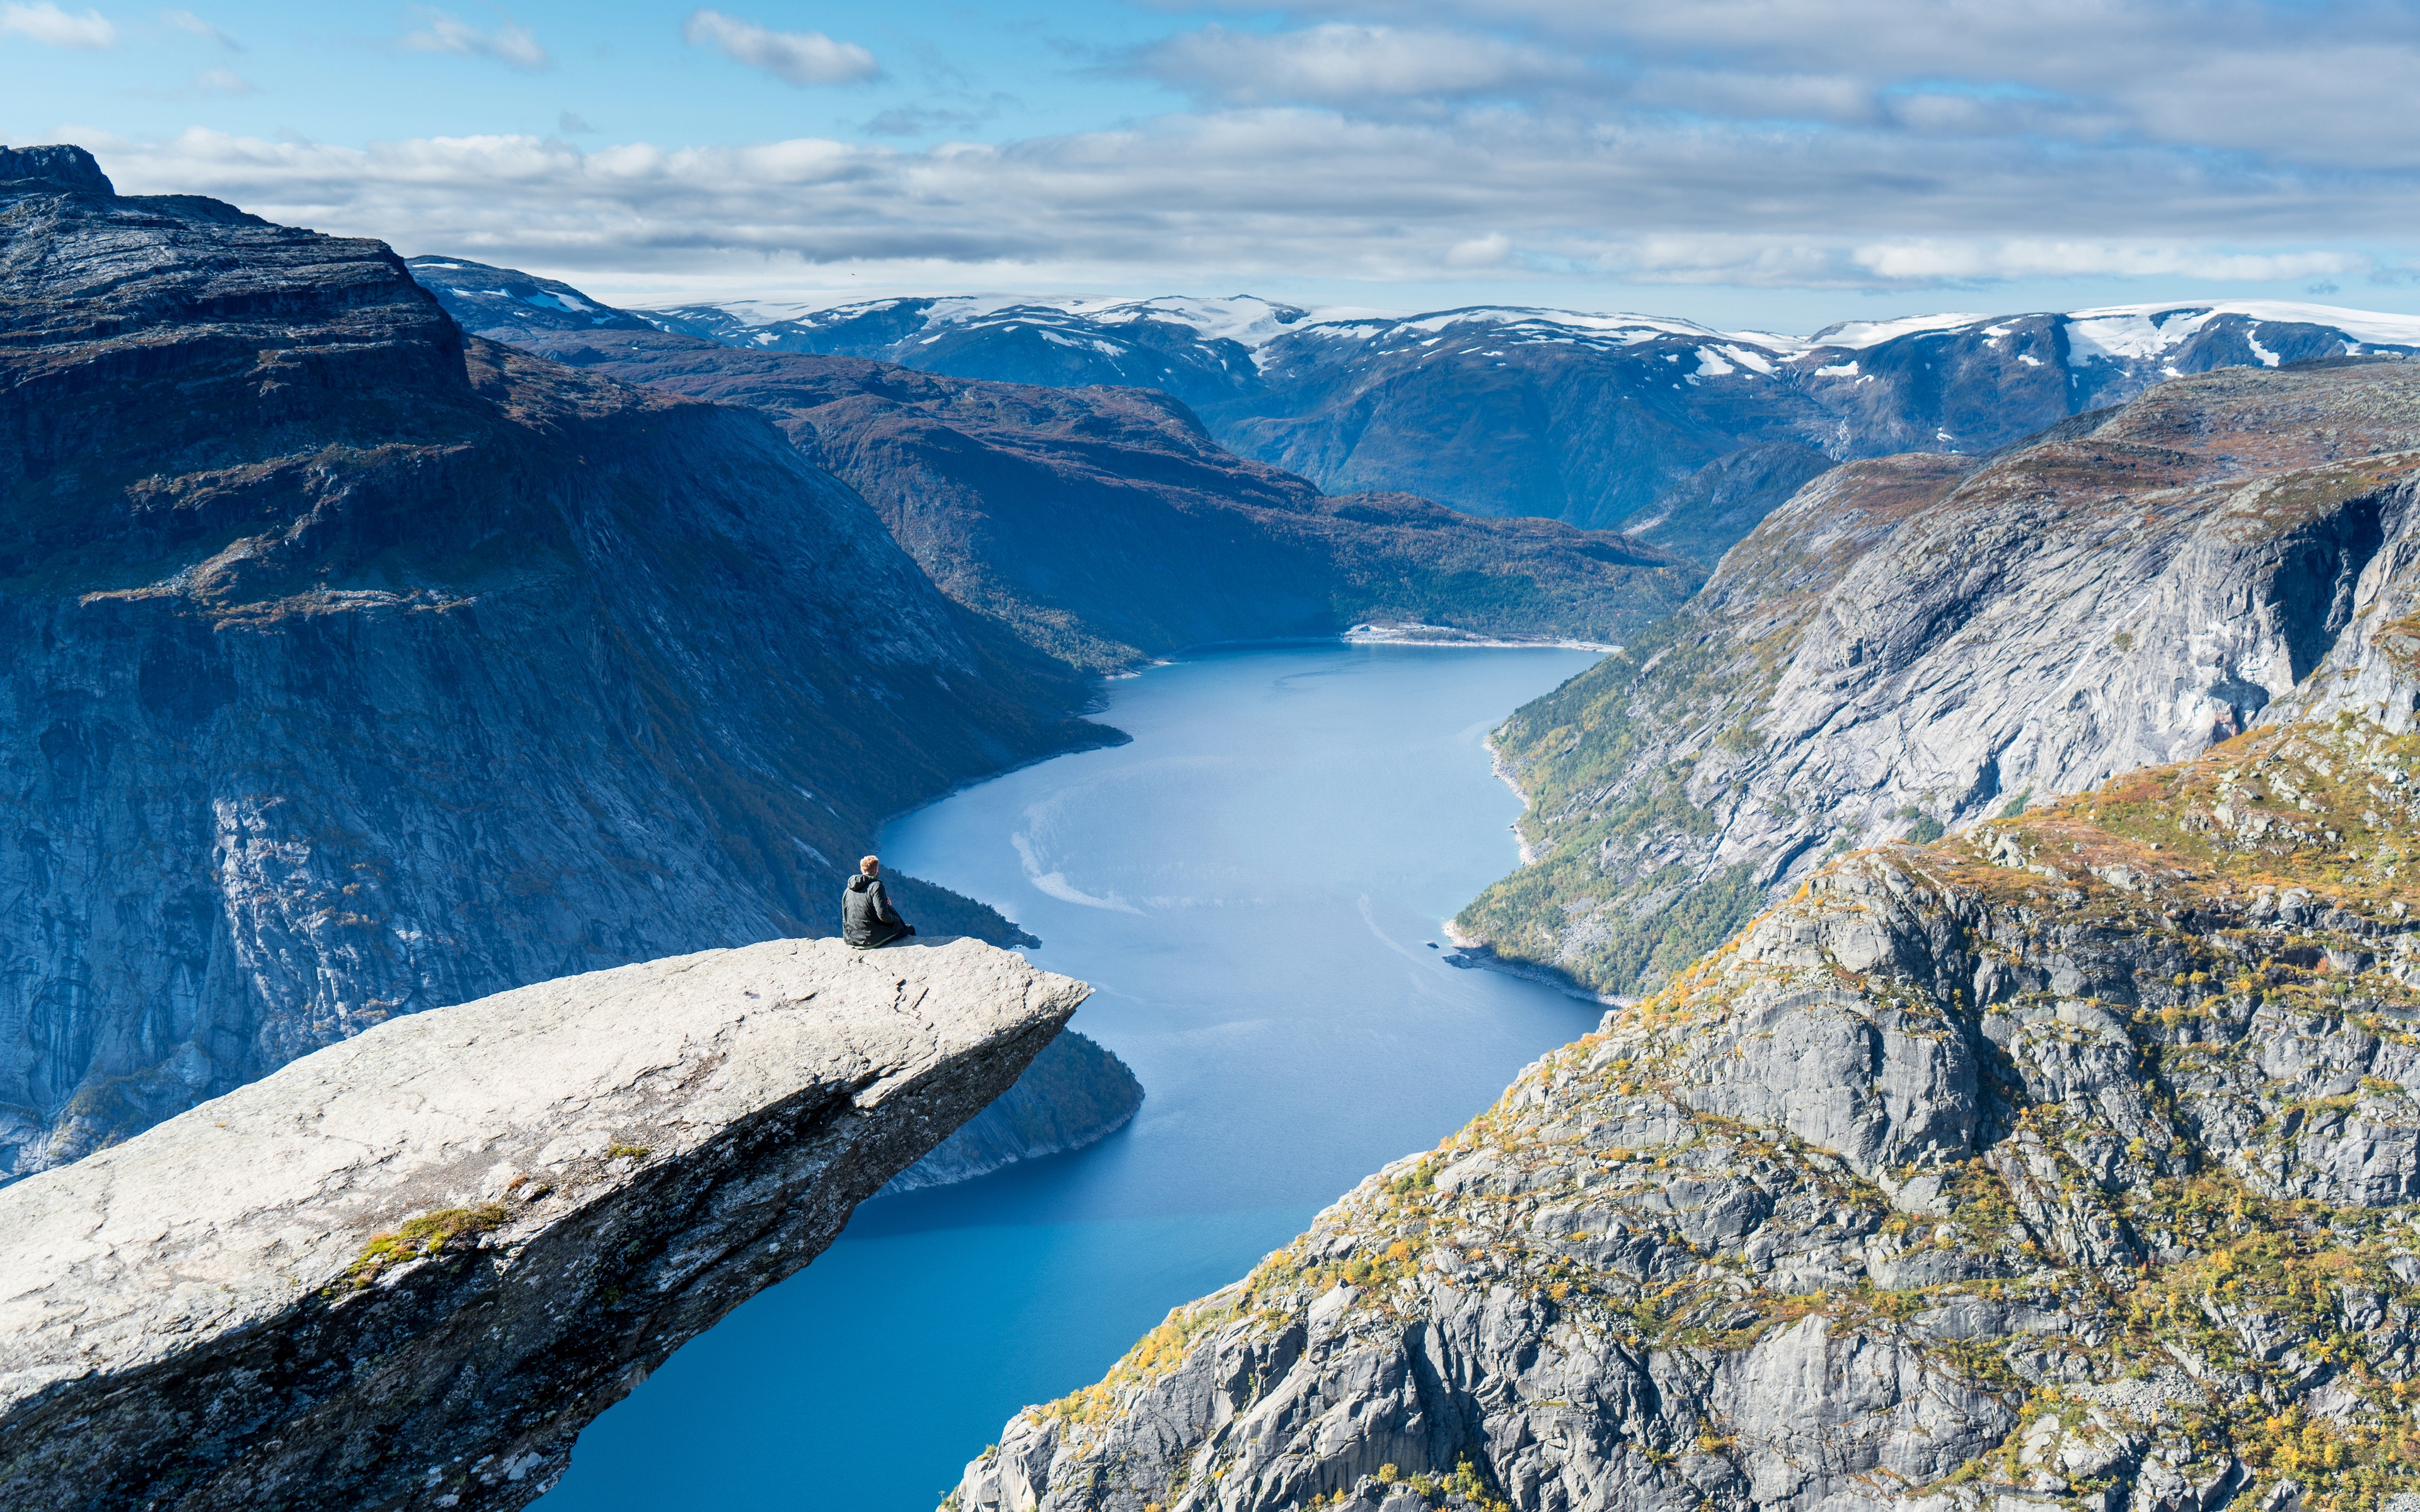 General 3840x2400 nature landscape Norway Trolltunga mountains fjord rocks sky clouds panorama water snow